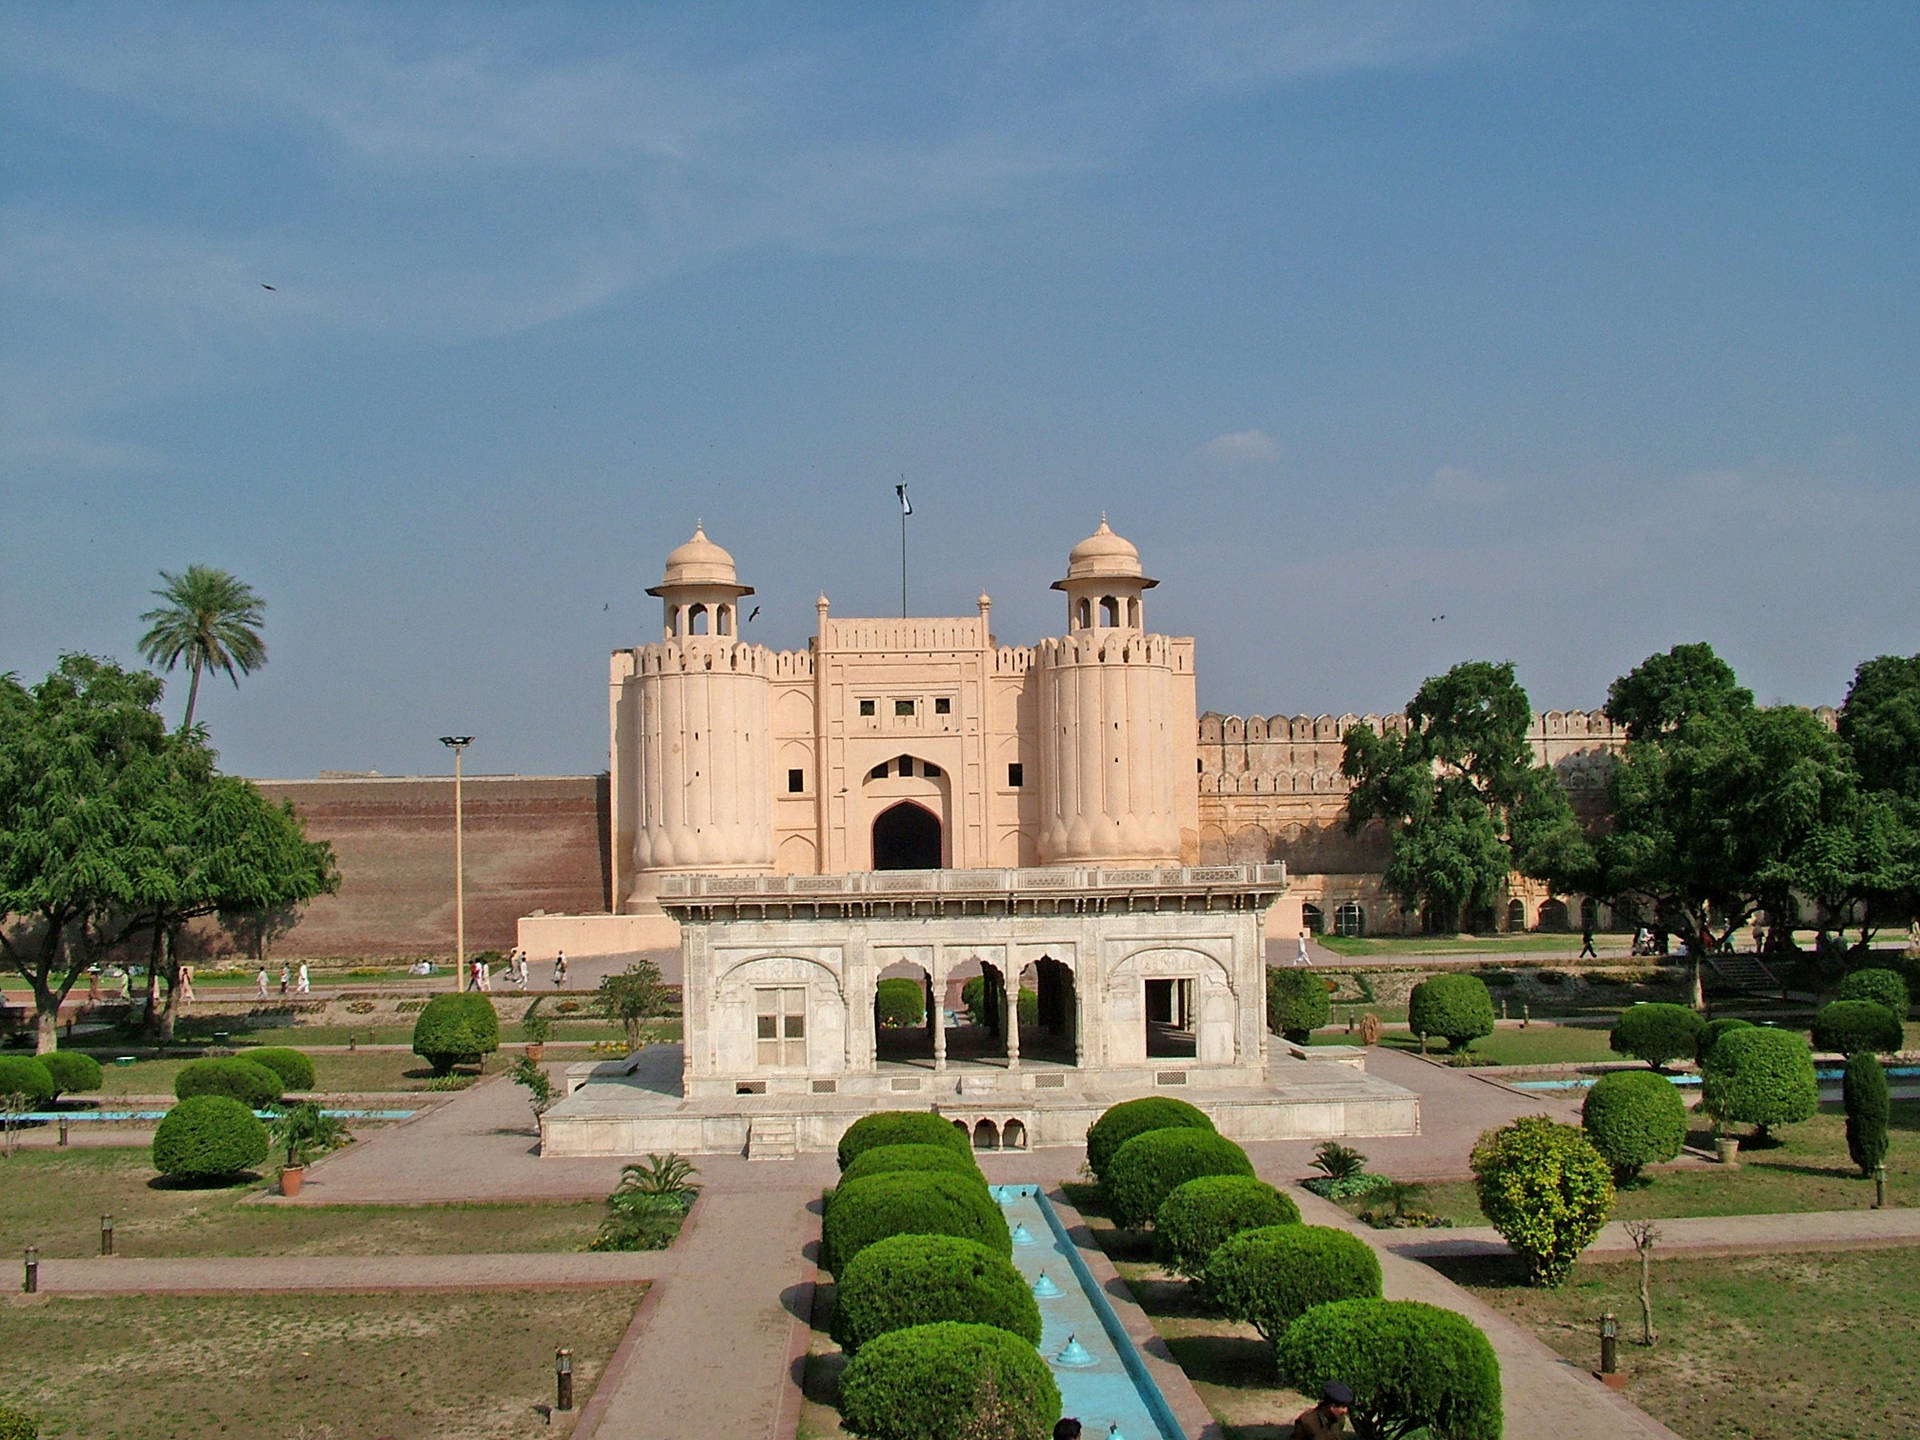 Majestic Lahore Fort With Hazuri Bagh In The Foreground.